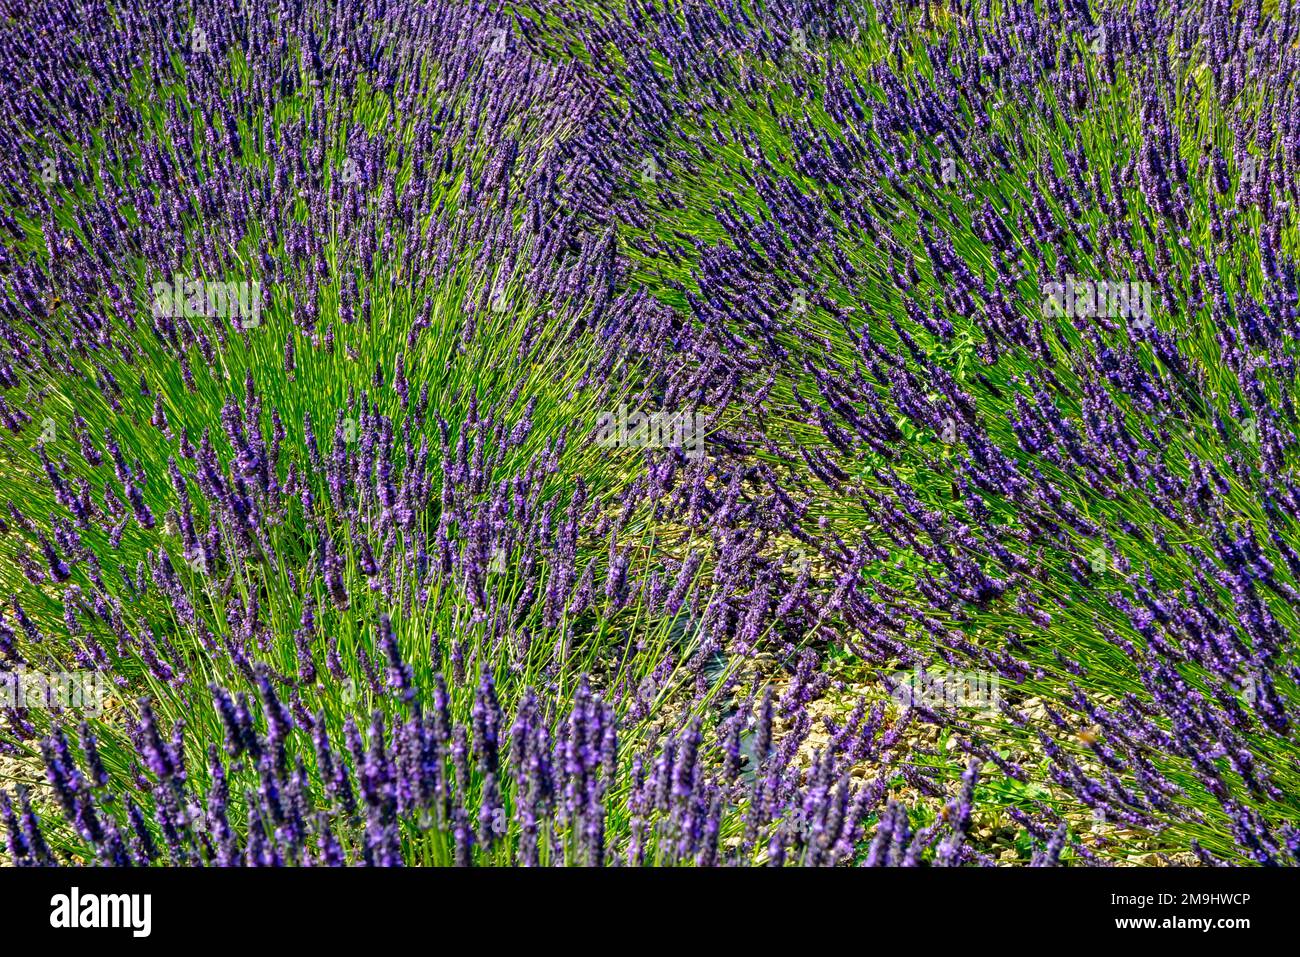 Lavandula common name lavender is a genus of 47 known species of flowering plants in the mint family, Lamiaceae. Stock Photo